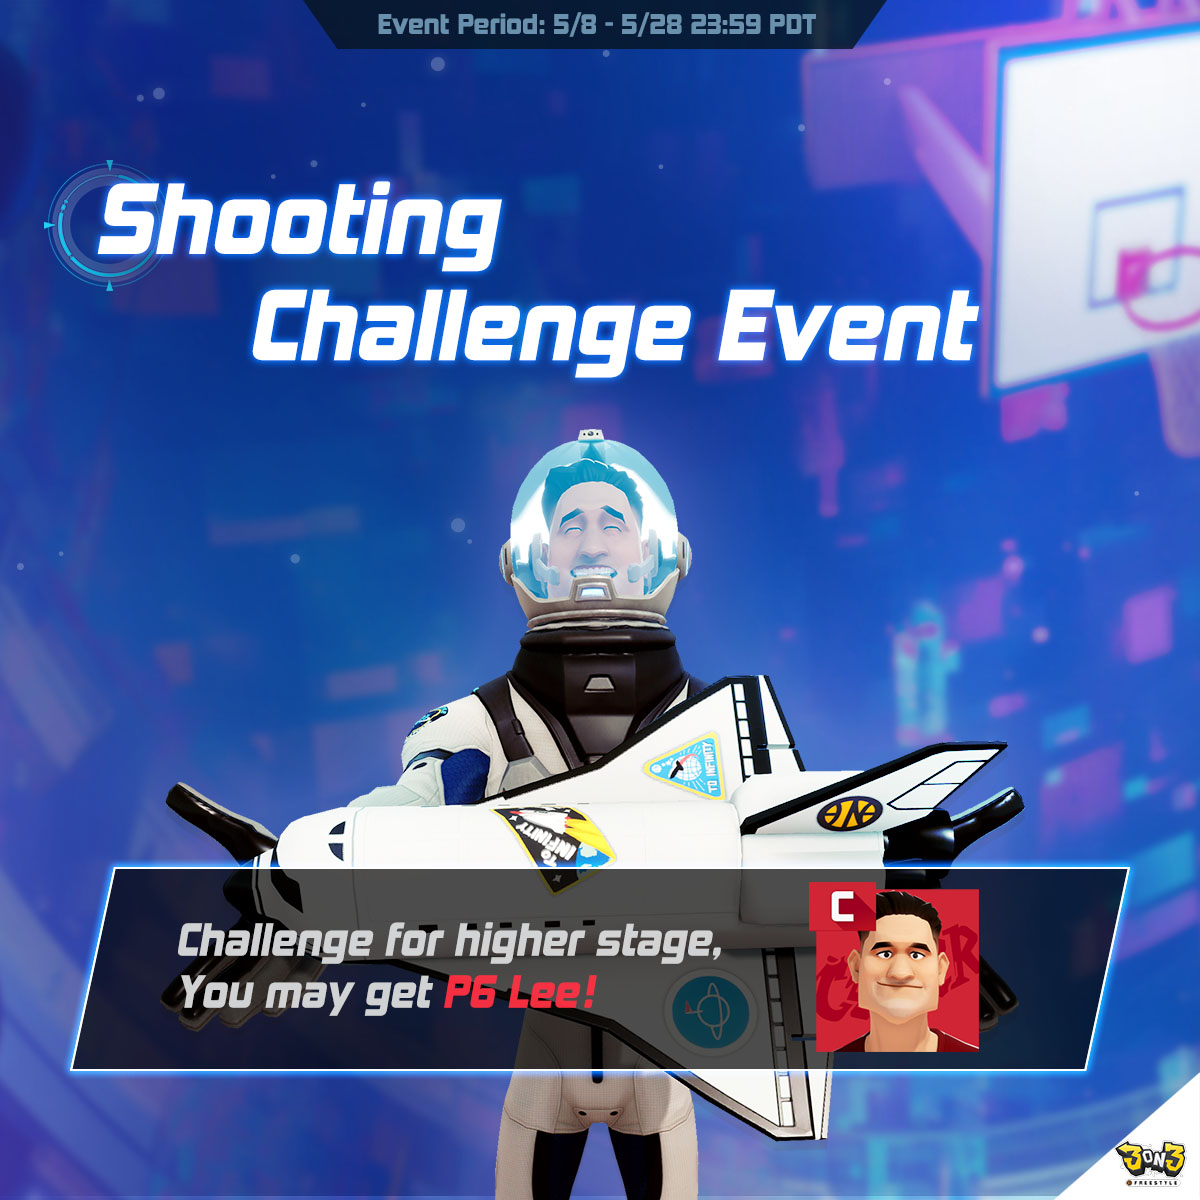 Ready to elevate your game? Join the Shooting Challenge Event now! Aim high, score big, and you might just unlock the legendary P6 Lee. It's time to step up to the challenge and aim for the top! 

#videogame #StreetBasketball #3on3freestyle